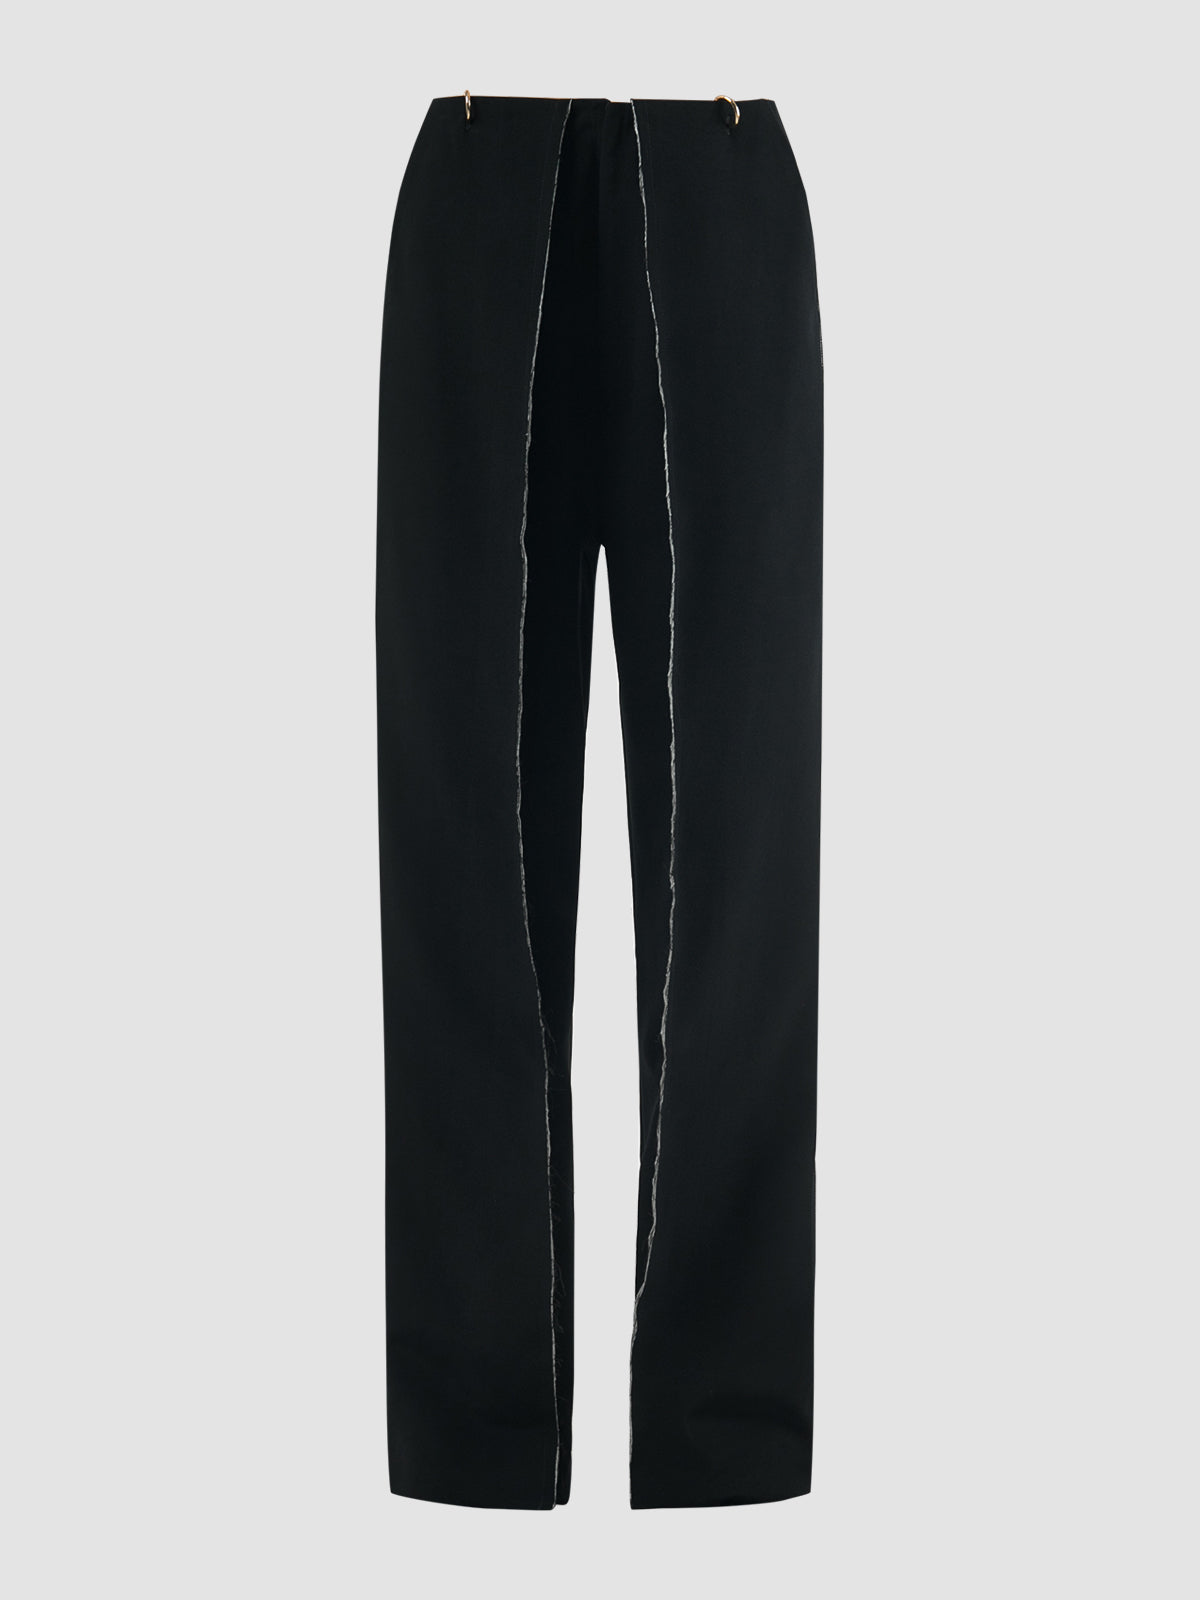 Black deconstructed tailored pants with front slits